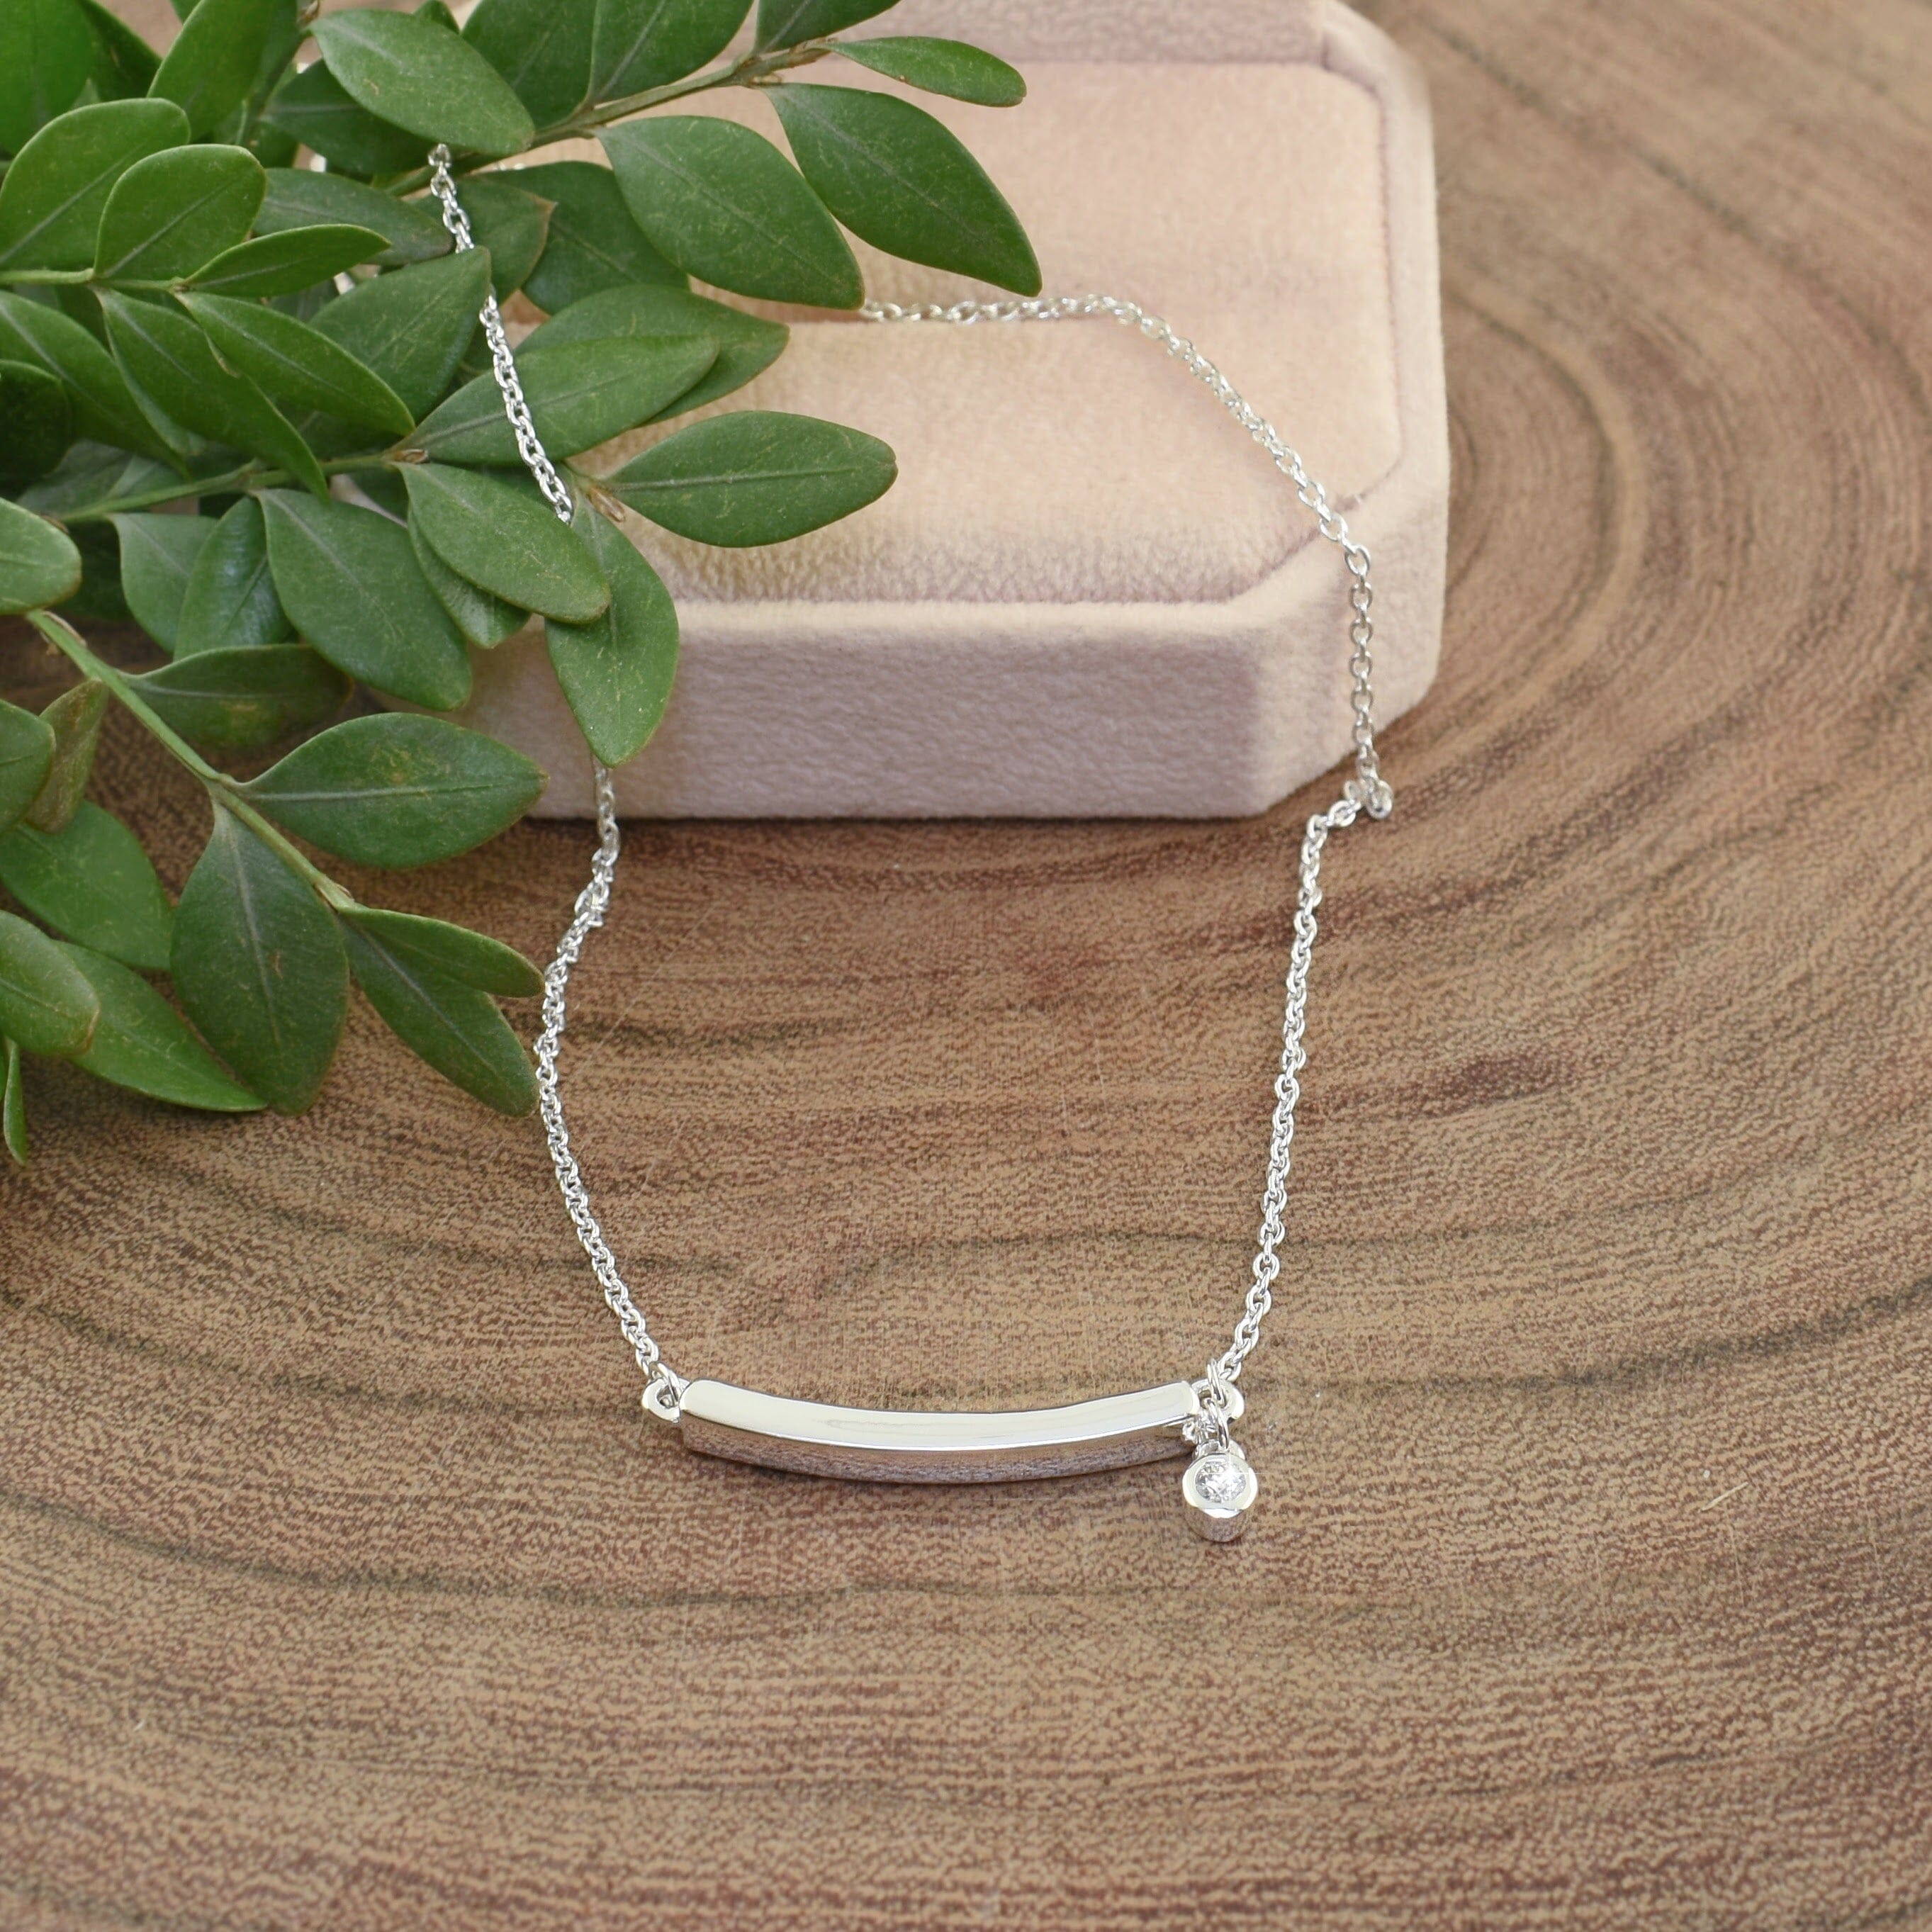 dainty necklace with a dangling diamond - Light At The End